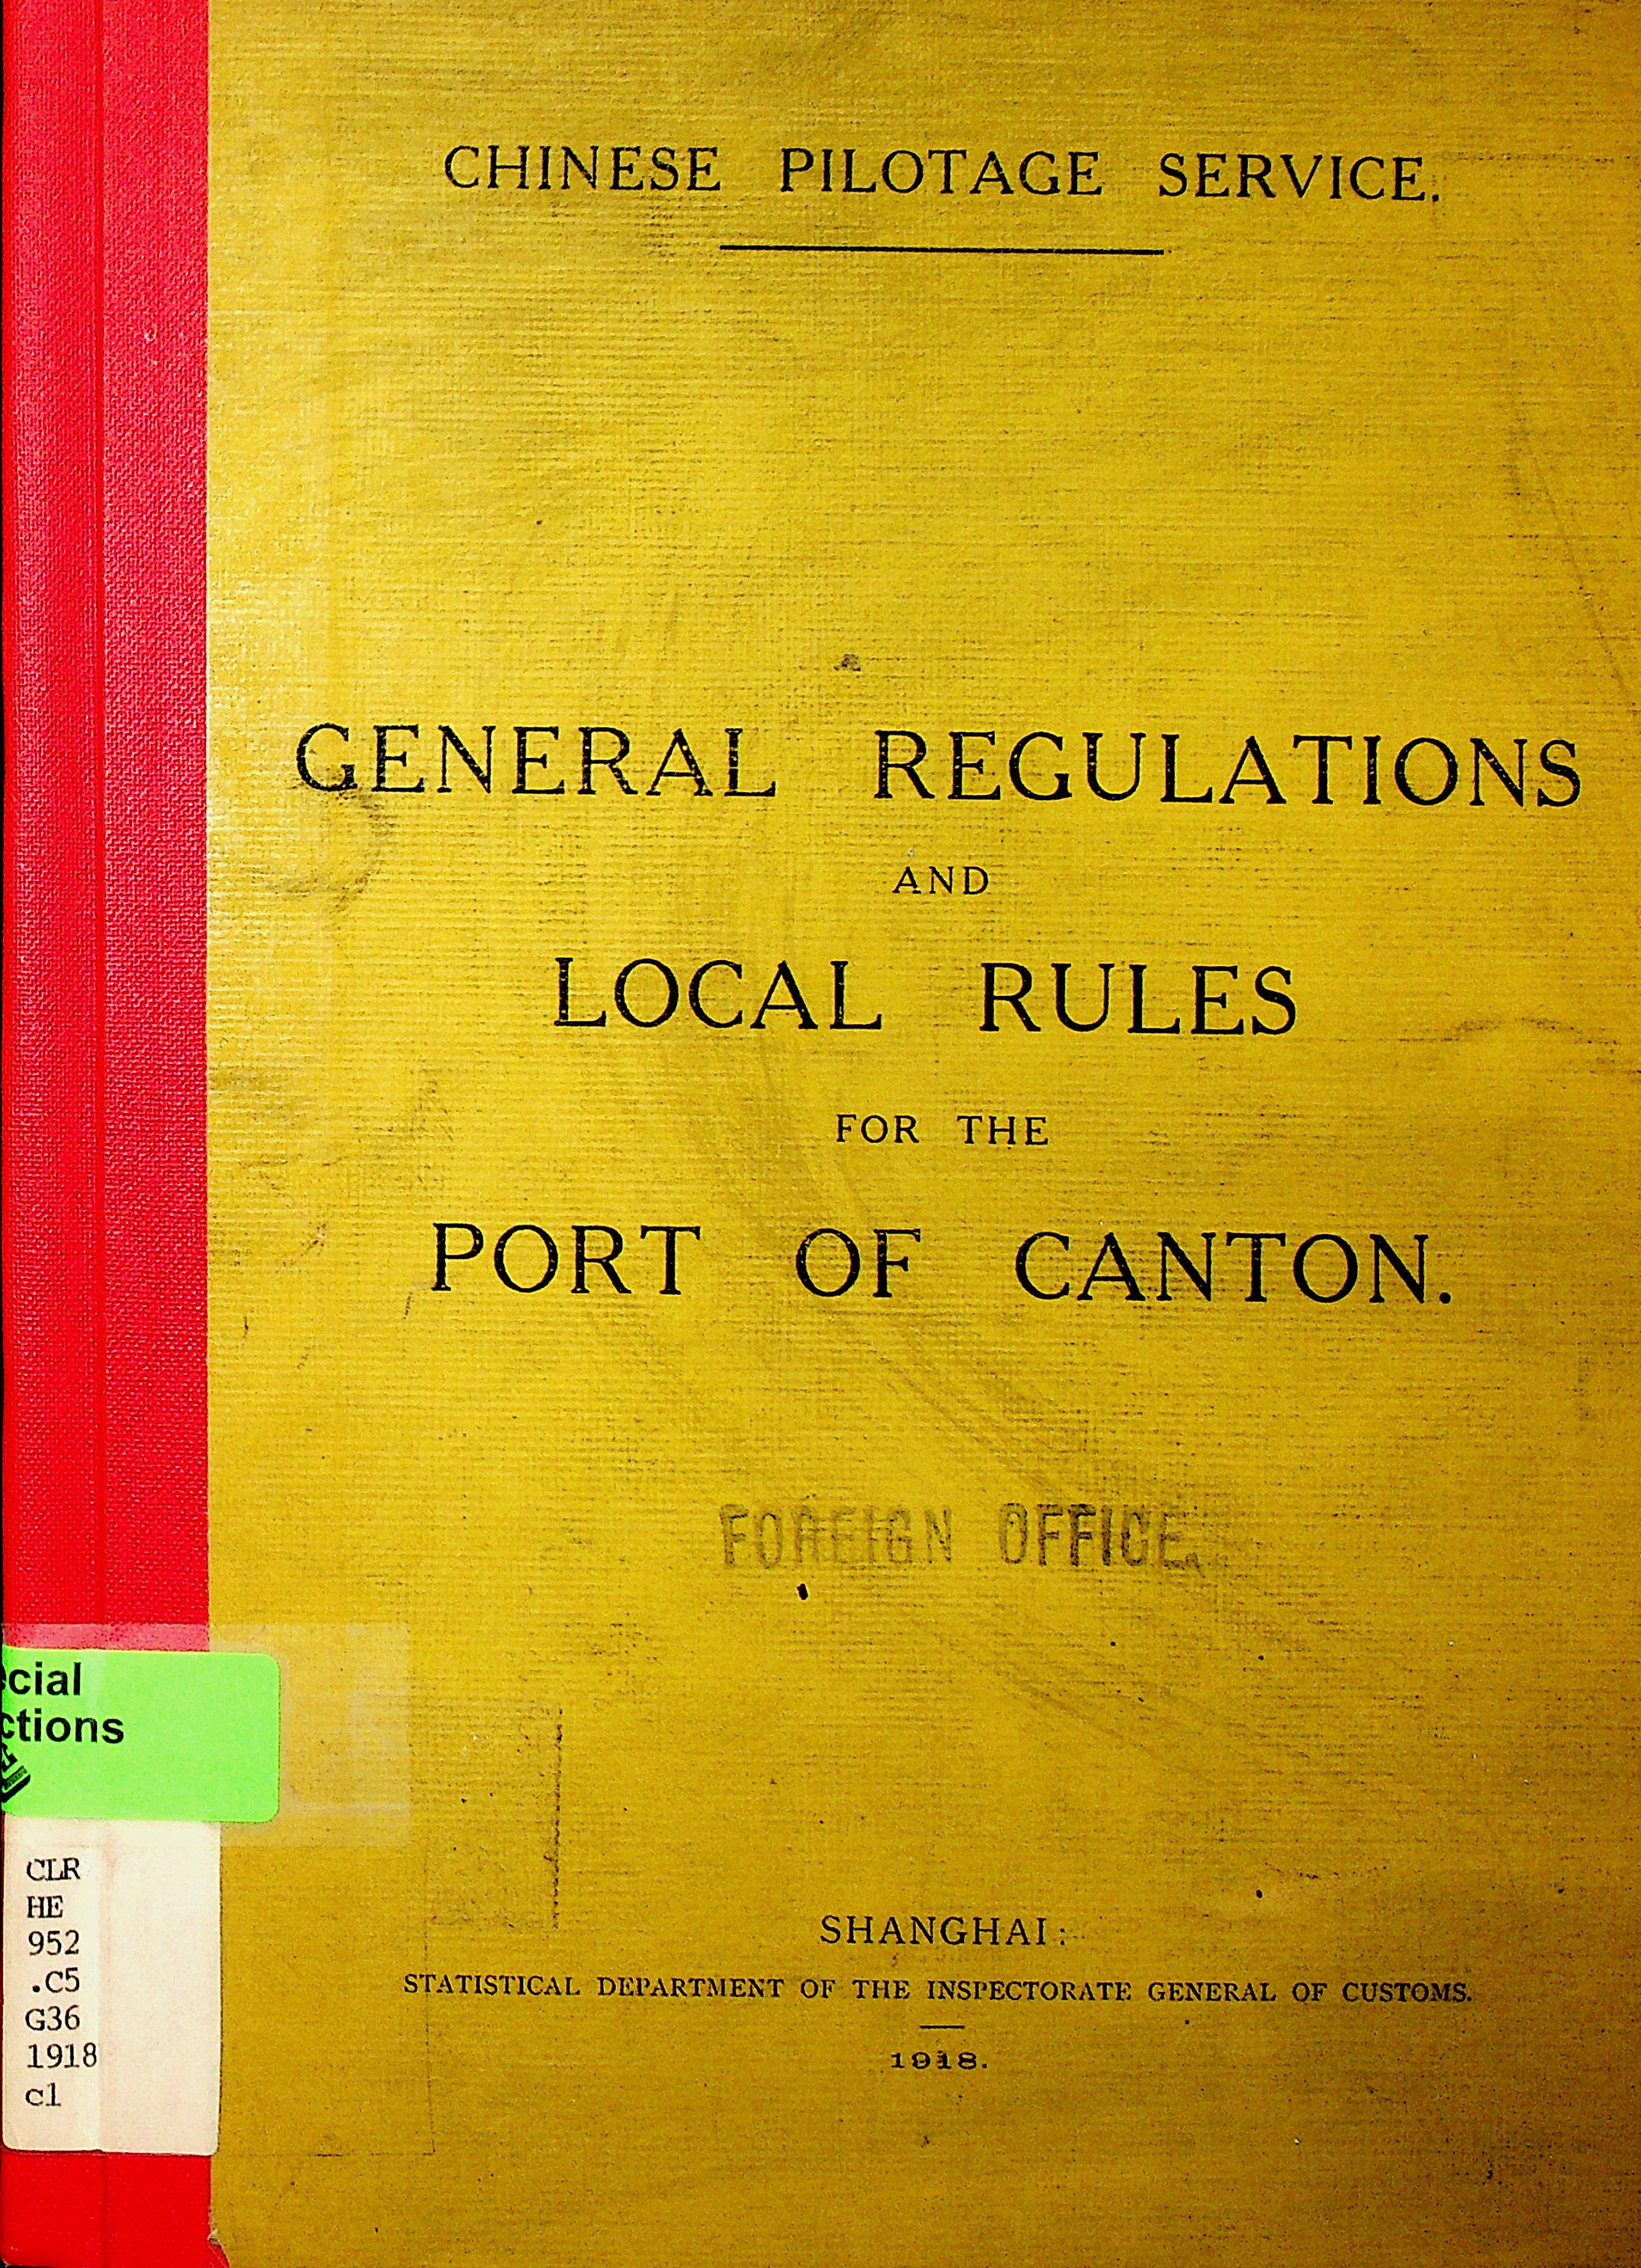 General regulations and local rules for the Port of Canton